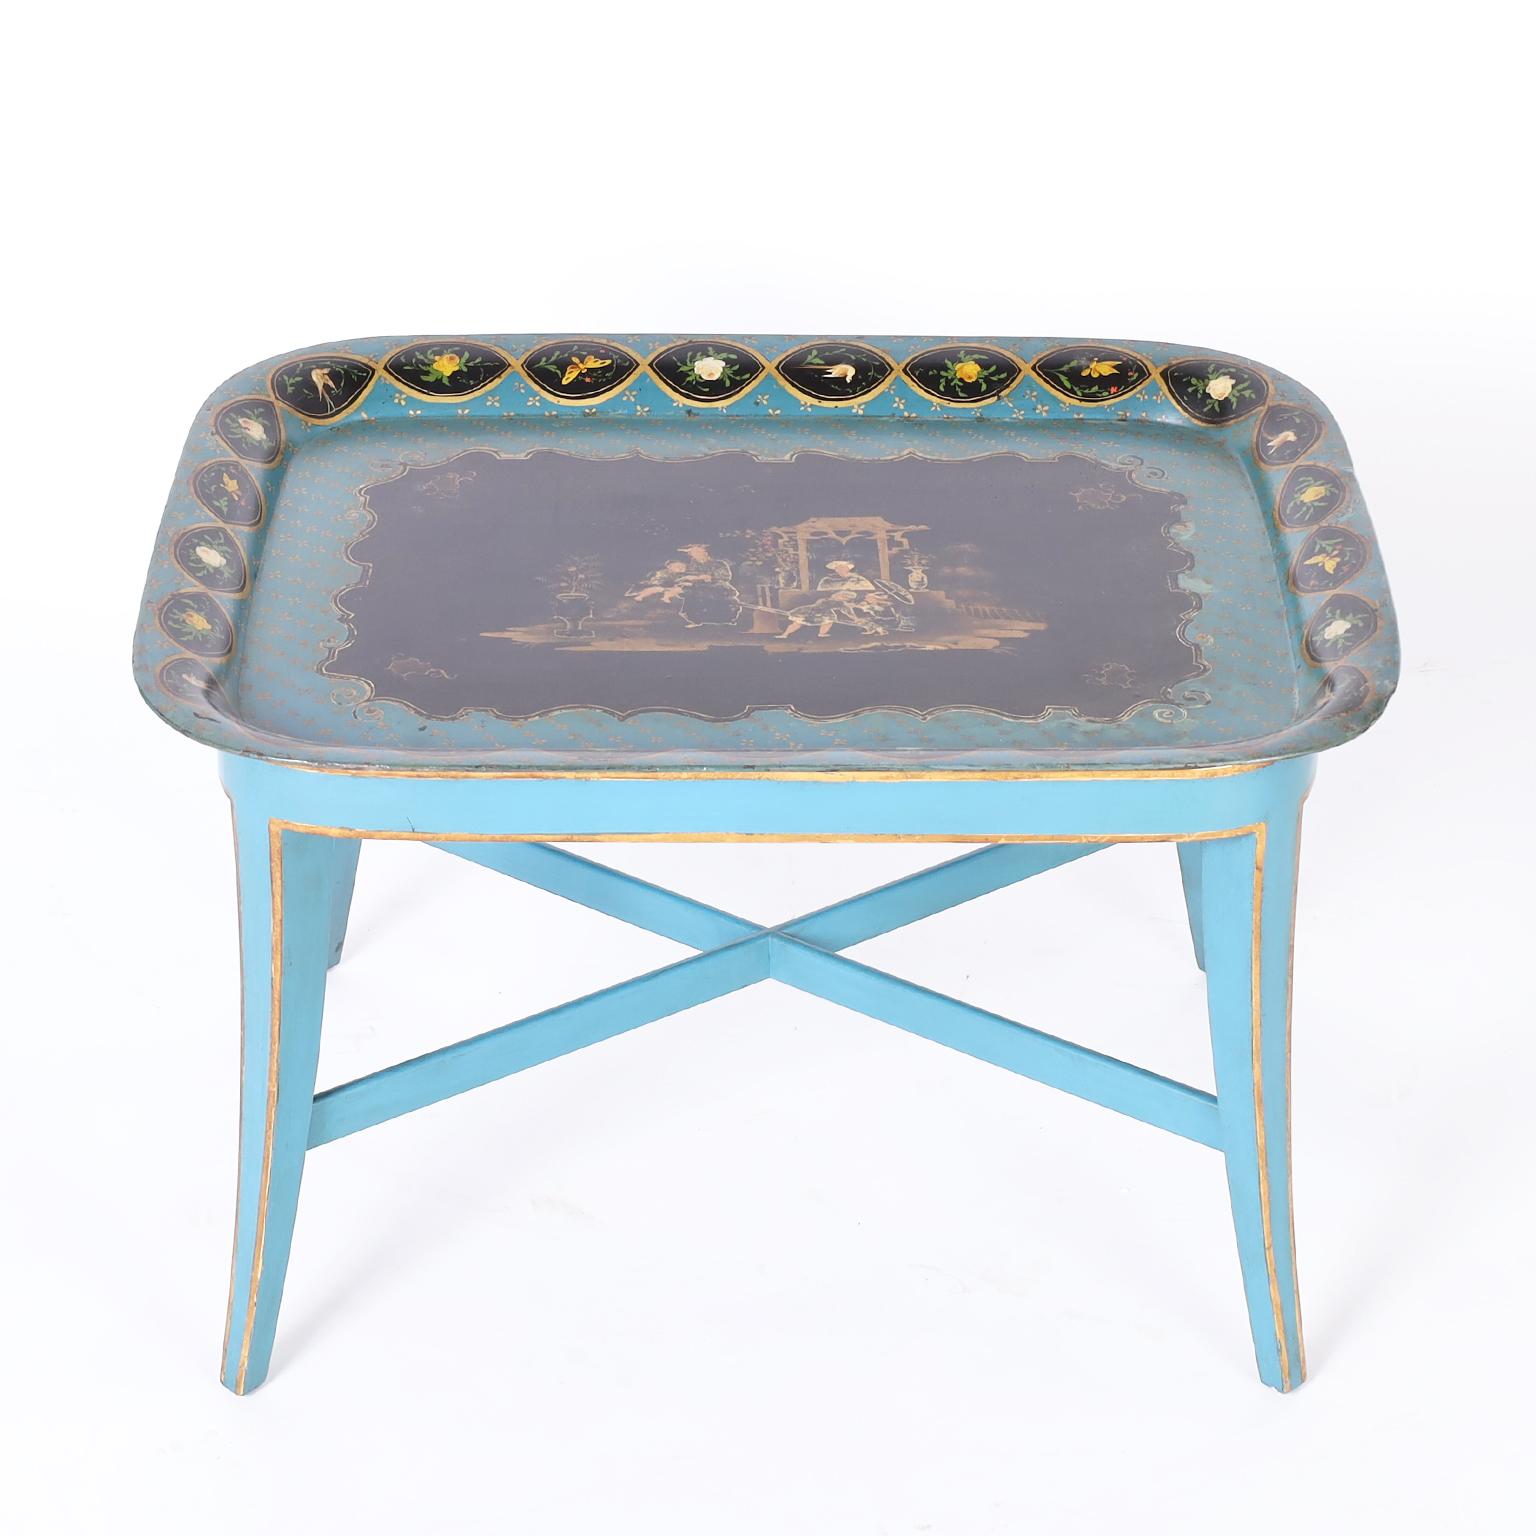 Neoclassical Revival Antique Italian Chinoiserie Tole Tray Table